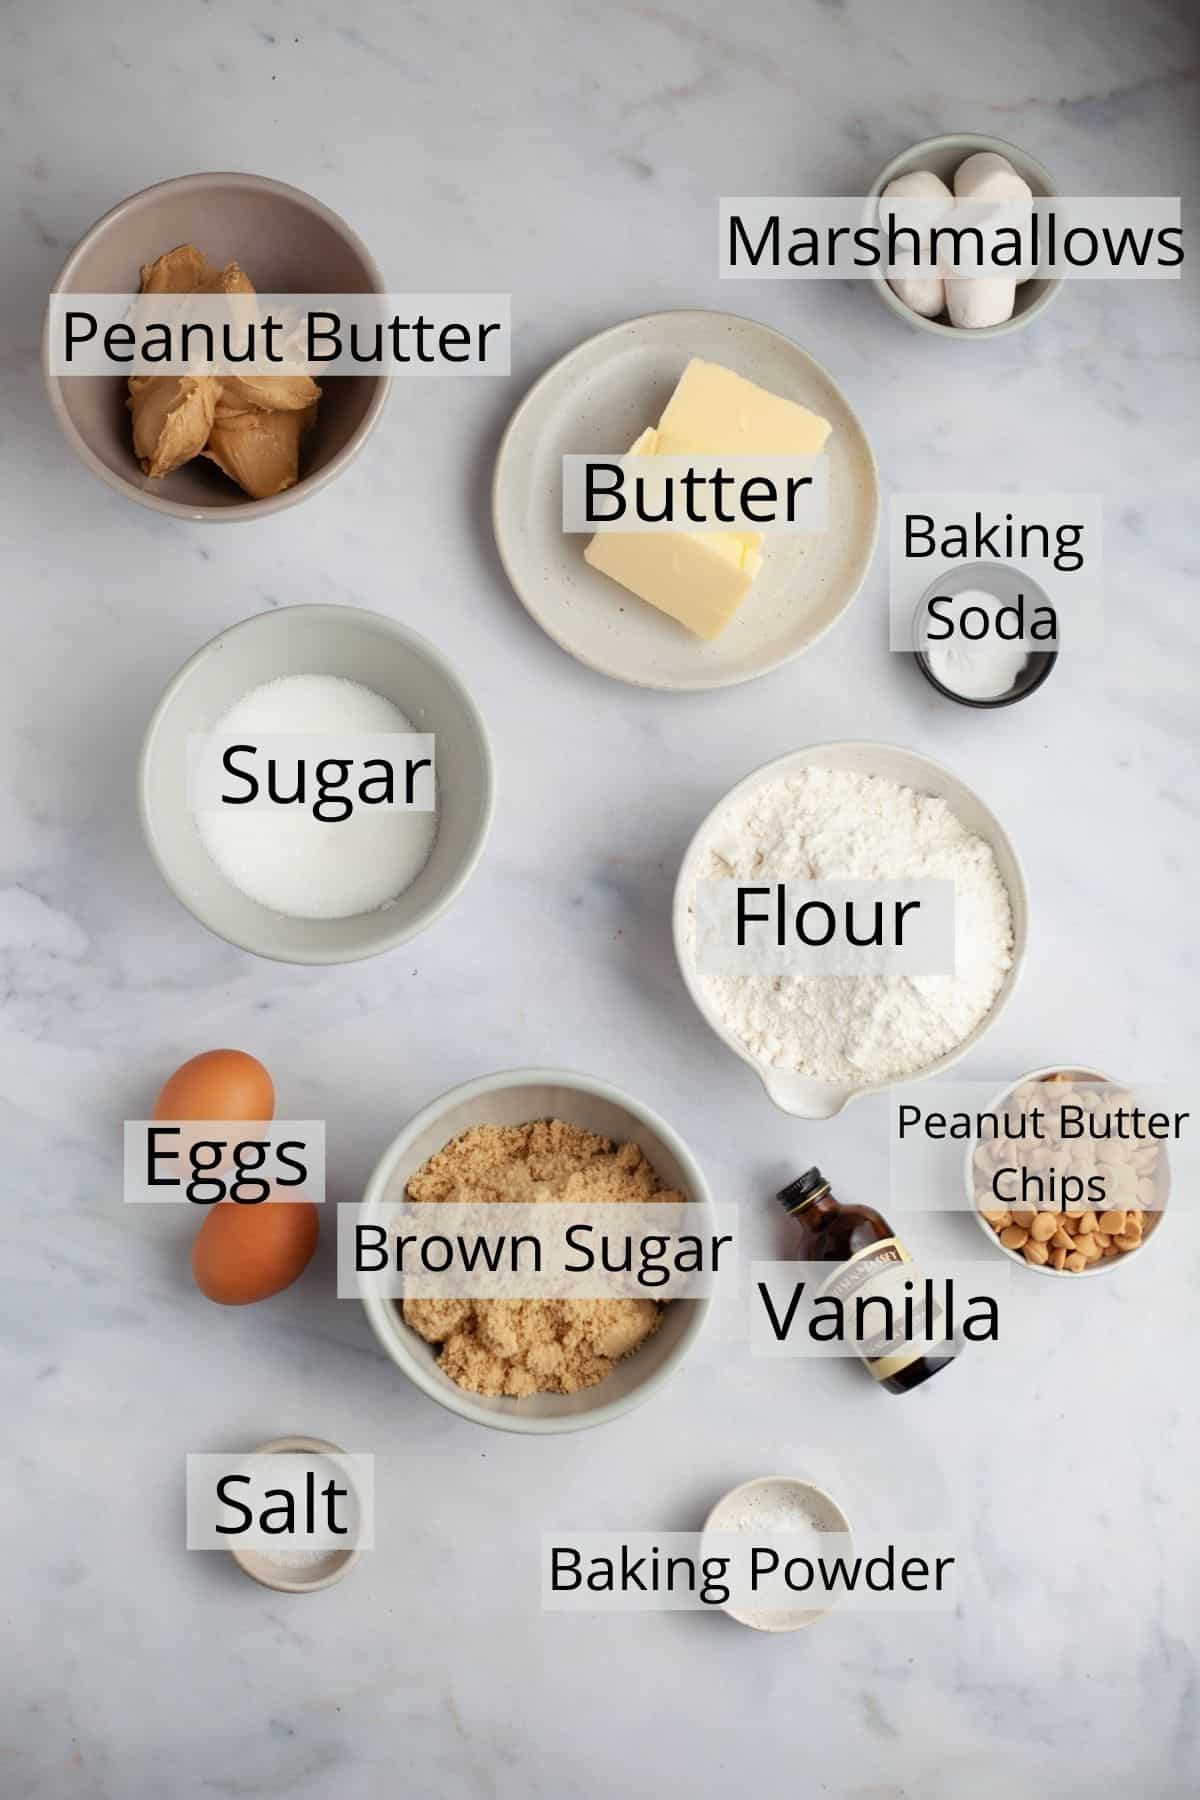 All the ingredients needed for peanut butter marshmallow cookies weighed out in small bowls.